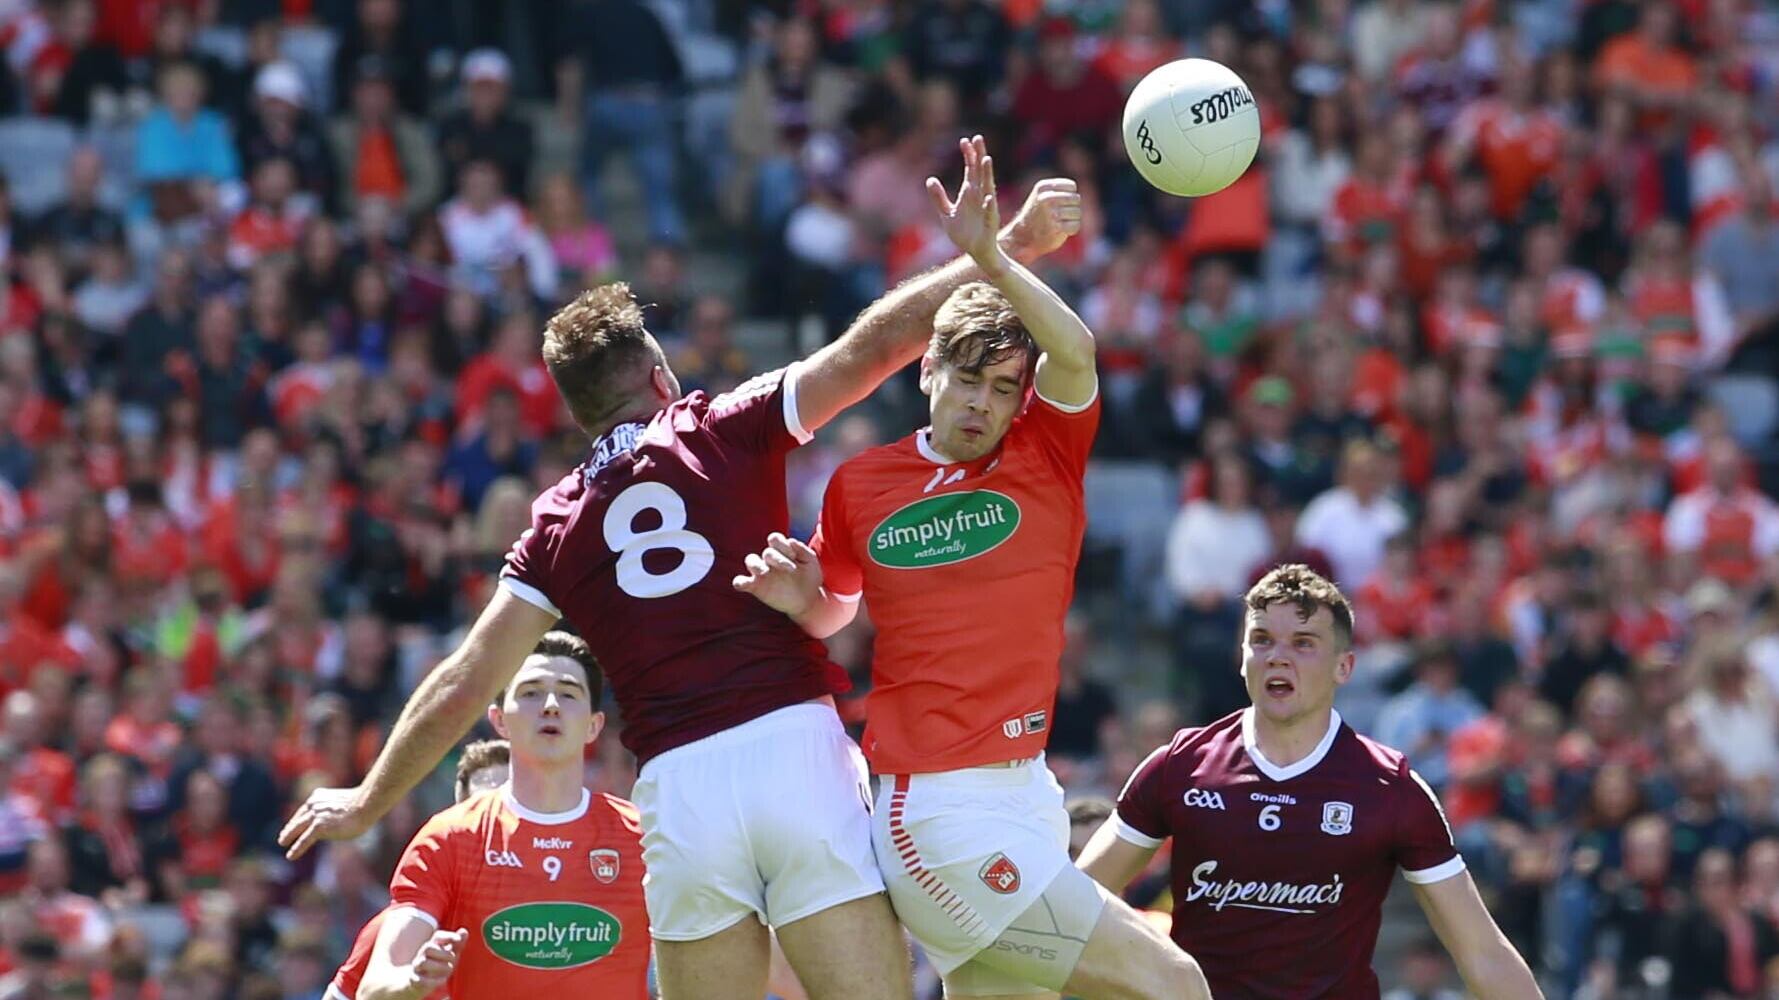 Armagh and Galway won't meet at Croke Park in the preliminary quarter-final